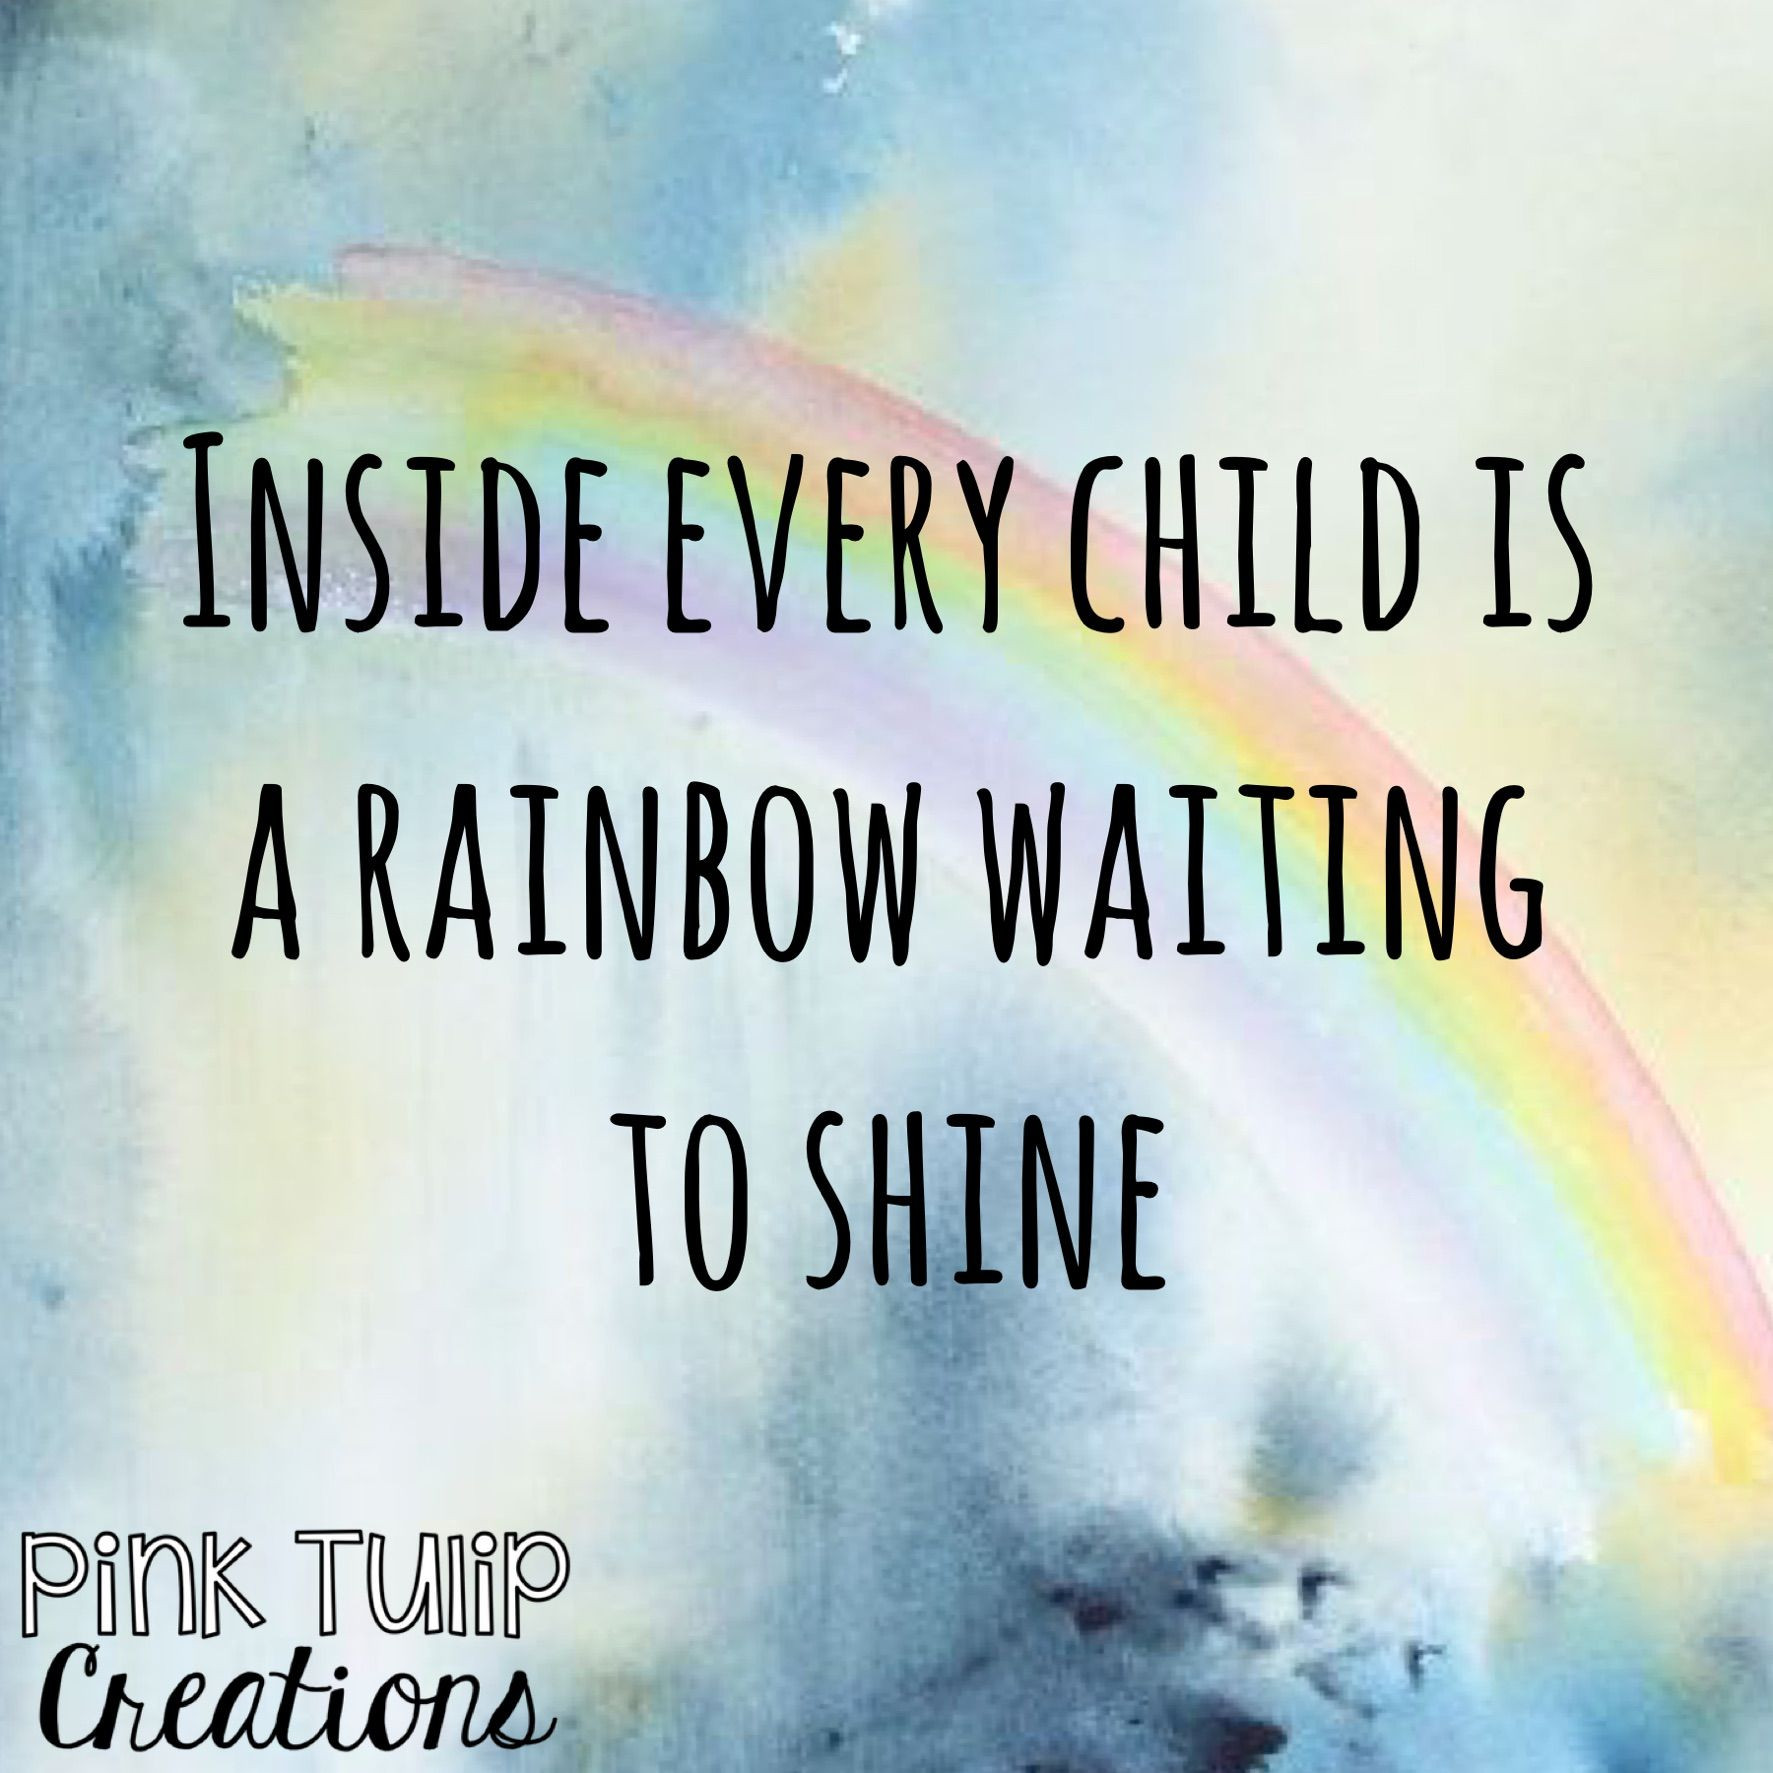 Children Education Quote
 Inside every child is a rainbow waiting to shine